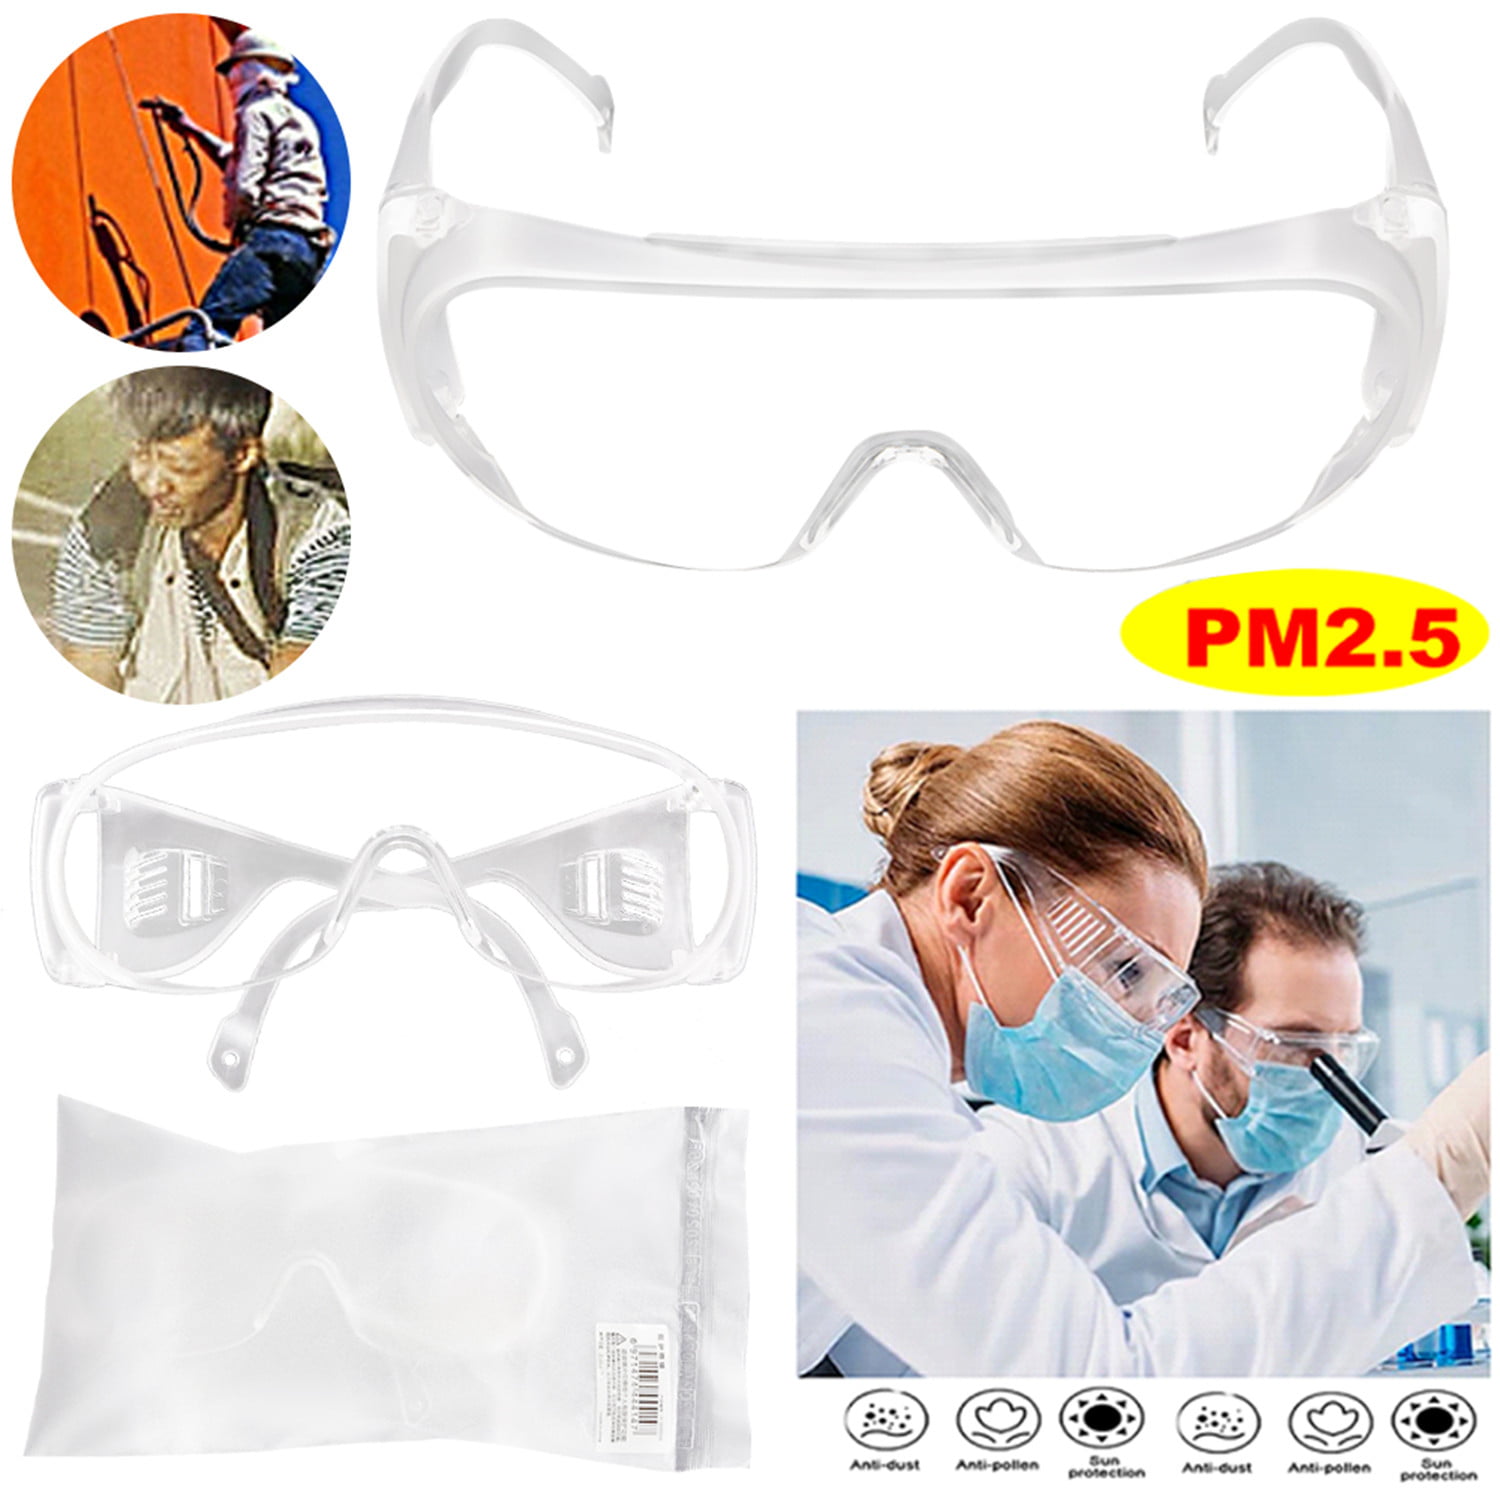 Details about   Safety Goggles Eye Protection Anti-Fog Anti-virus Glasses Unisex Clear Vented 